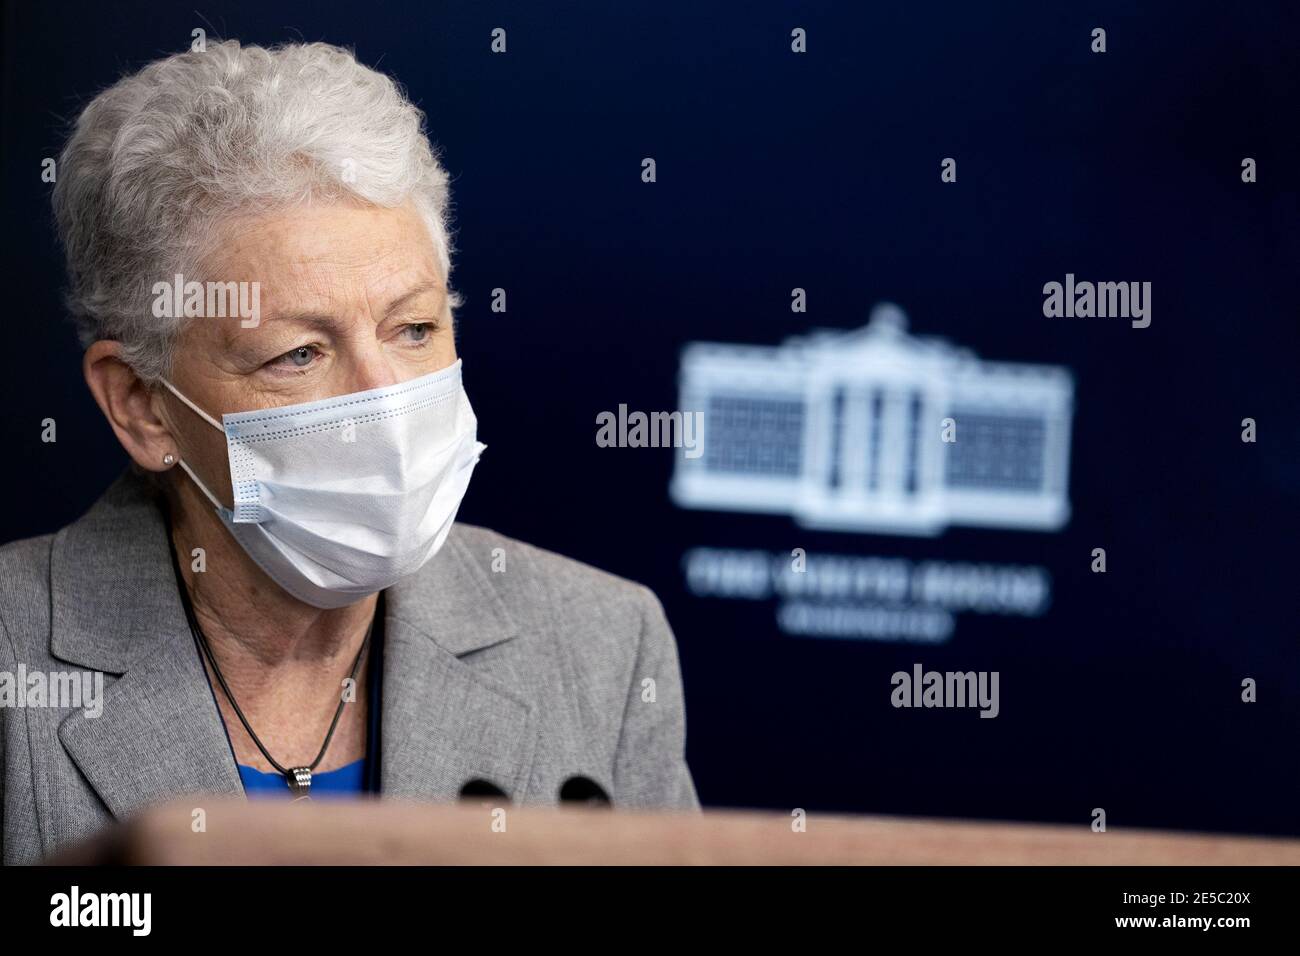 Washington, United States. 27th Jan, 2021. Gina McCarthy, National Climate Advisor, speaks during a news conference in the James S. Brady Press Briefing Room at the White House in Washington, DC, U.S., on Wednesday, Jan. 27, 2021. U.S. President Joe Biden will take executive action on Wednesday to combat climate change, including temporarily blocking new leases for oil drilling on federal lands, ordering a review of fossil-fuel subsidies and other measures to overhaul the U.S. energy mix. Credit: UPI/Alamy Live News Stock Photo